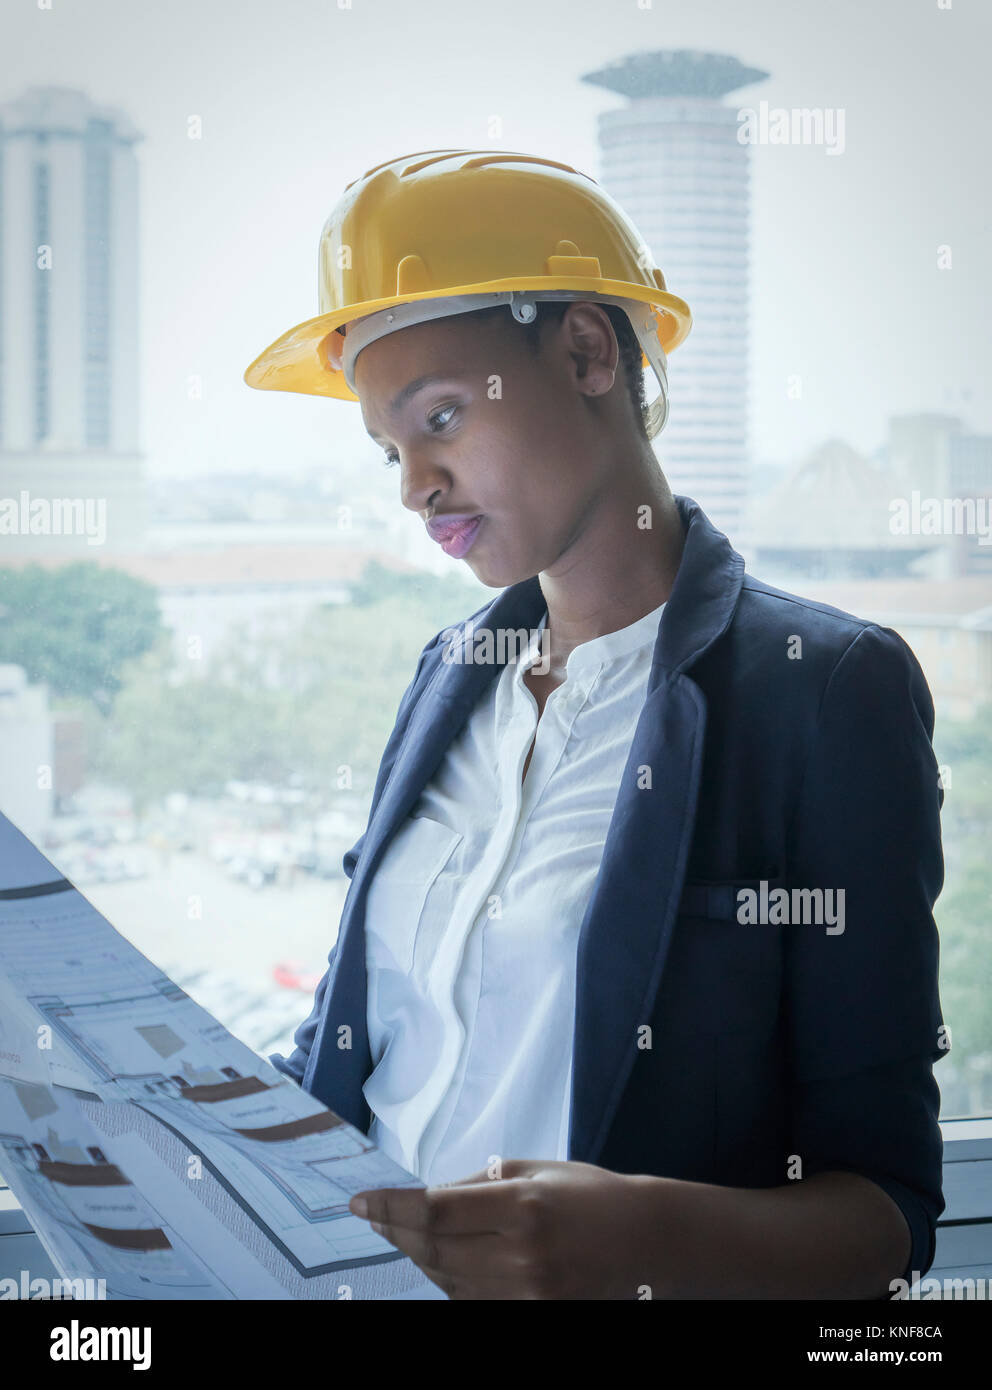 Woman in hard hat looking at building plans Stock Photo